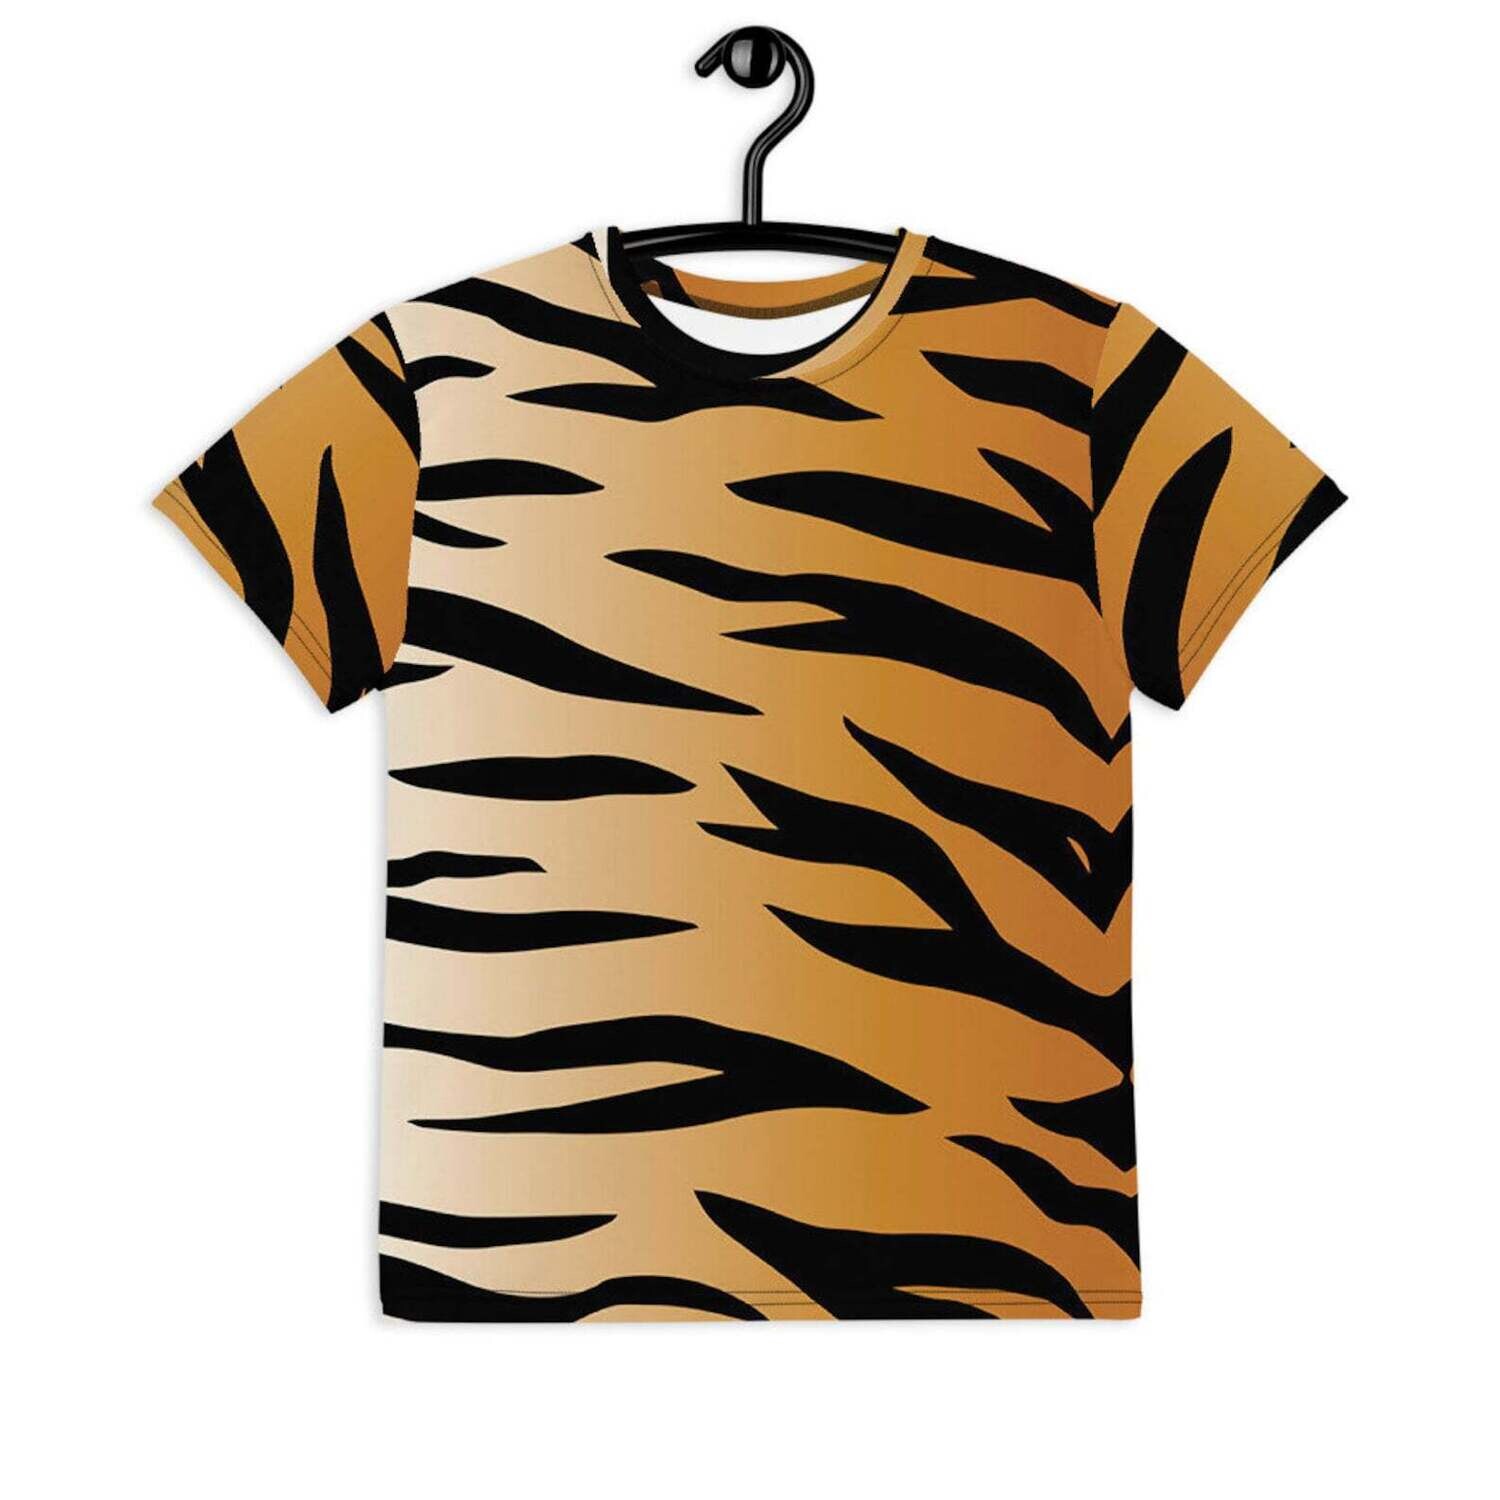 👸🏽🤴🏽🐅 Youth soft crew neck t-shirt Tiger print, premium jersey, Gift for Animal Lovers, Cat Lovers, Cat Lovers, Halloween costume, Made in the USA